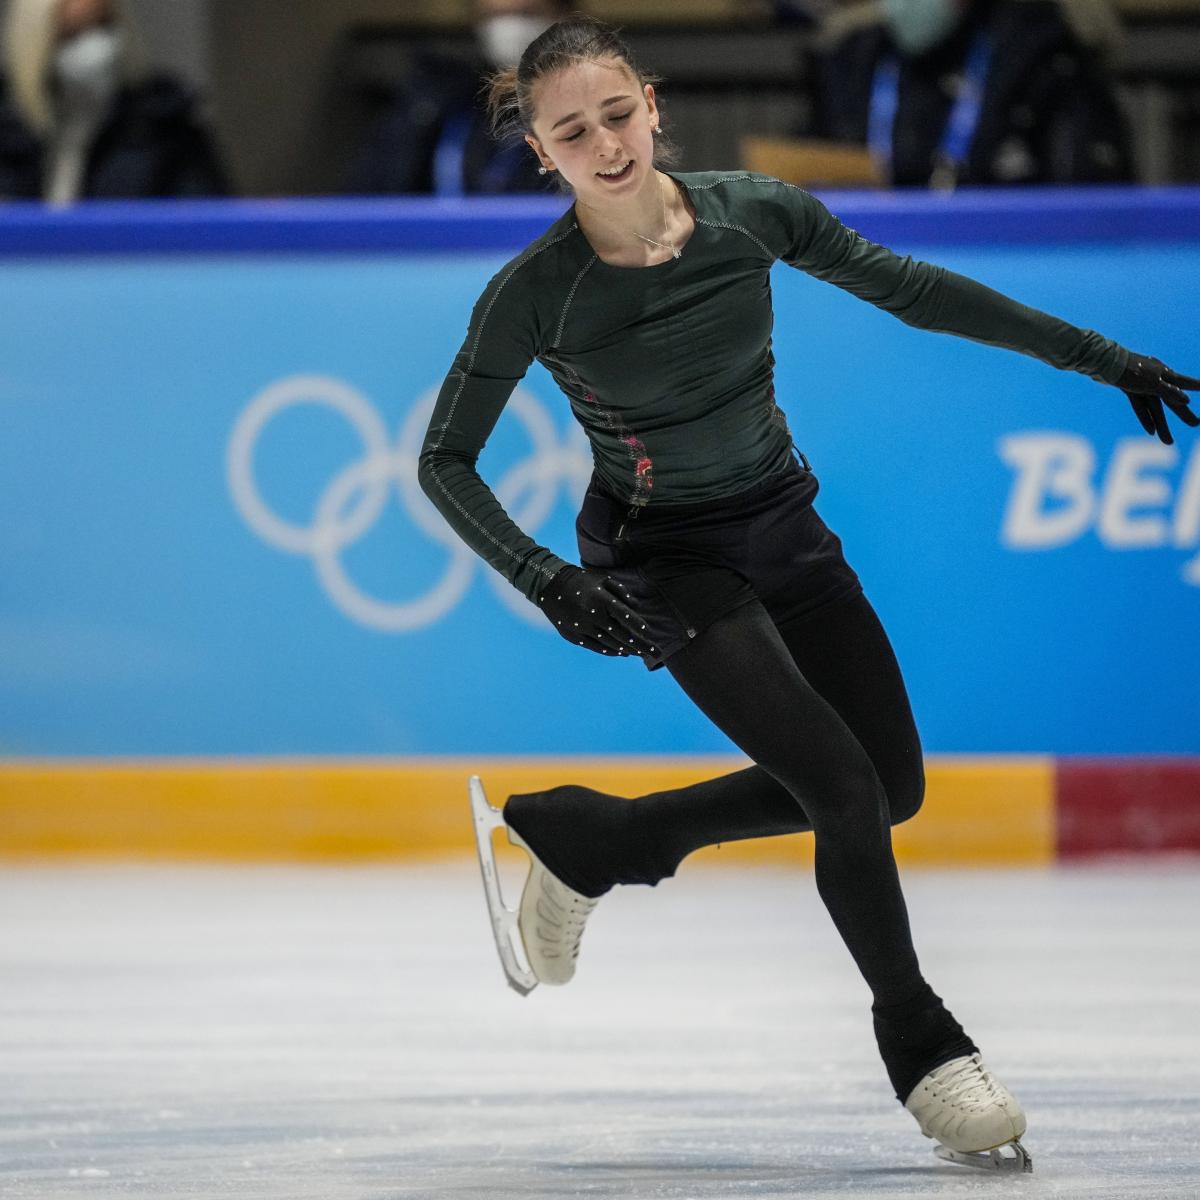 US Olympic Figure Skating 2022: Full Schedule, Odds for Remaining Medal